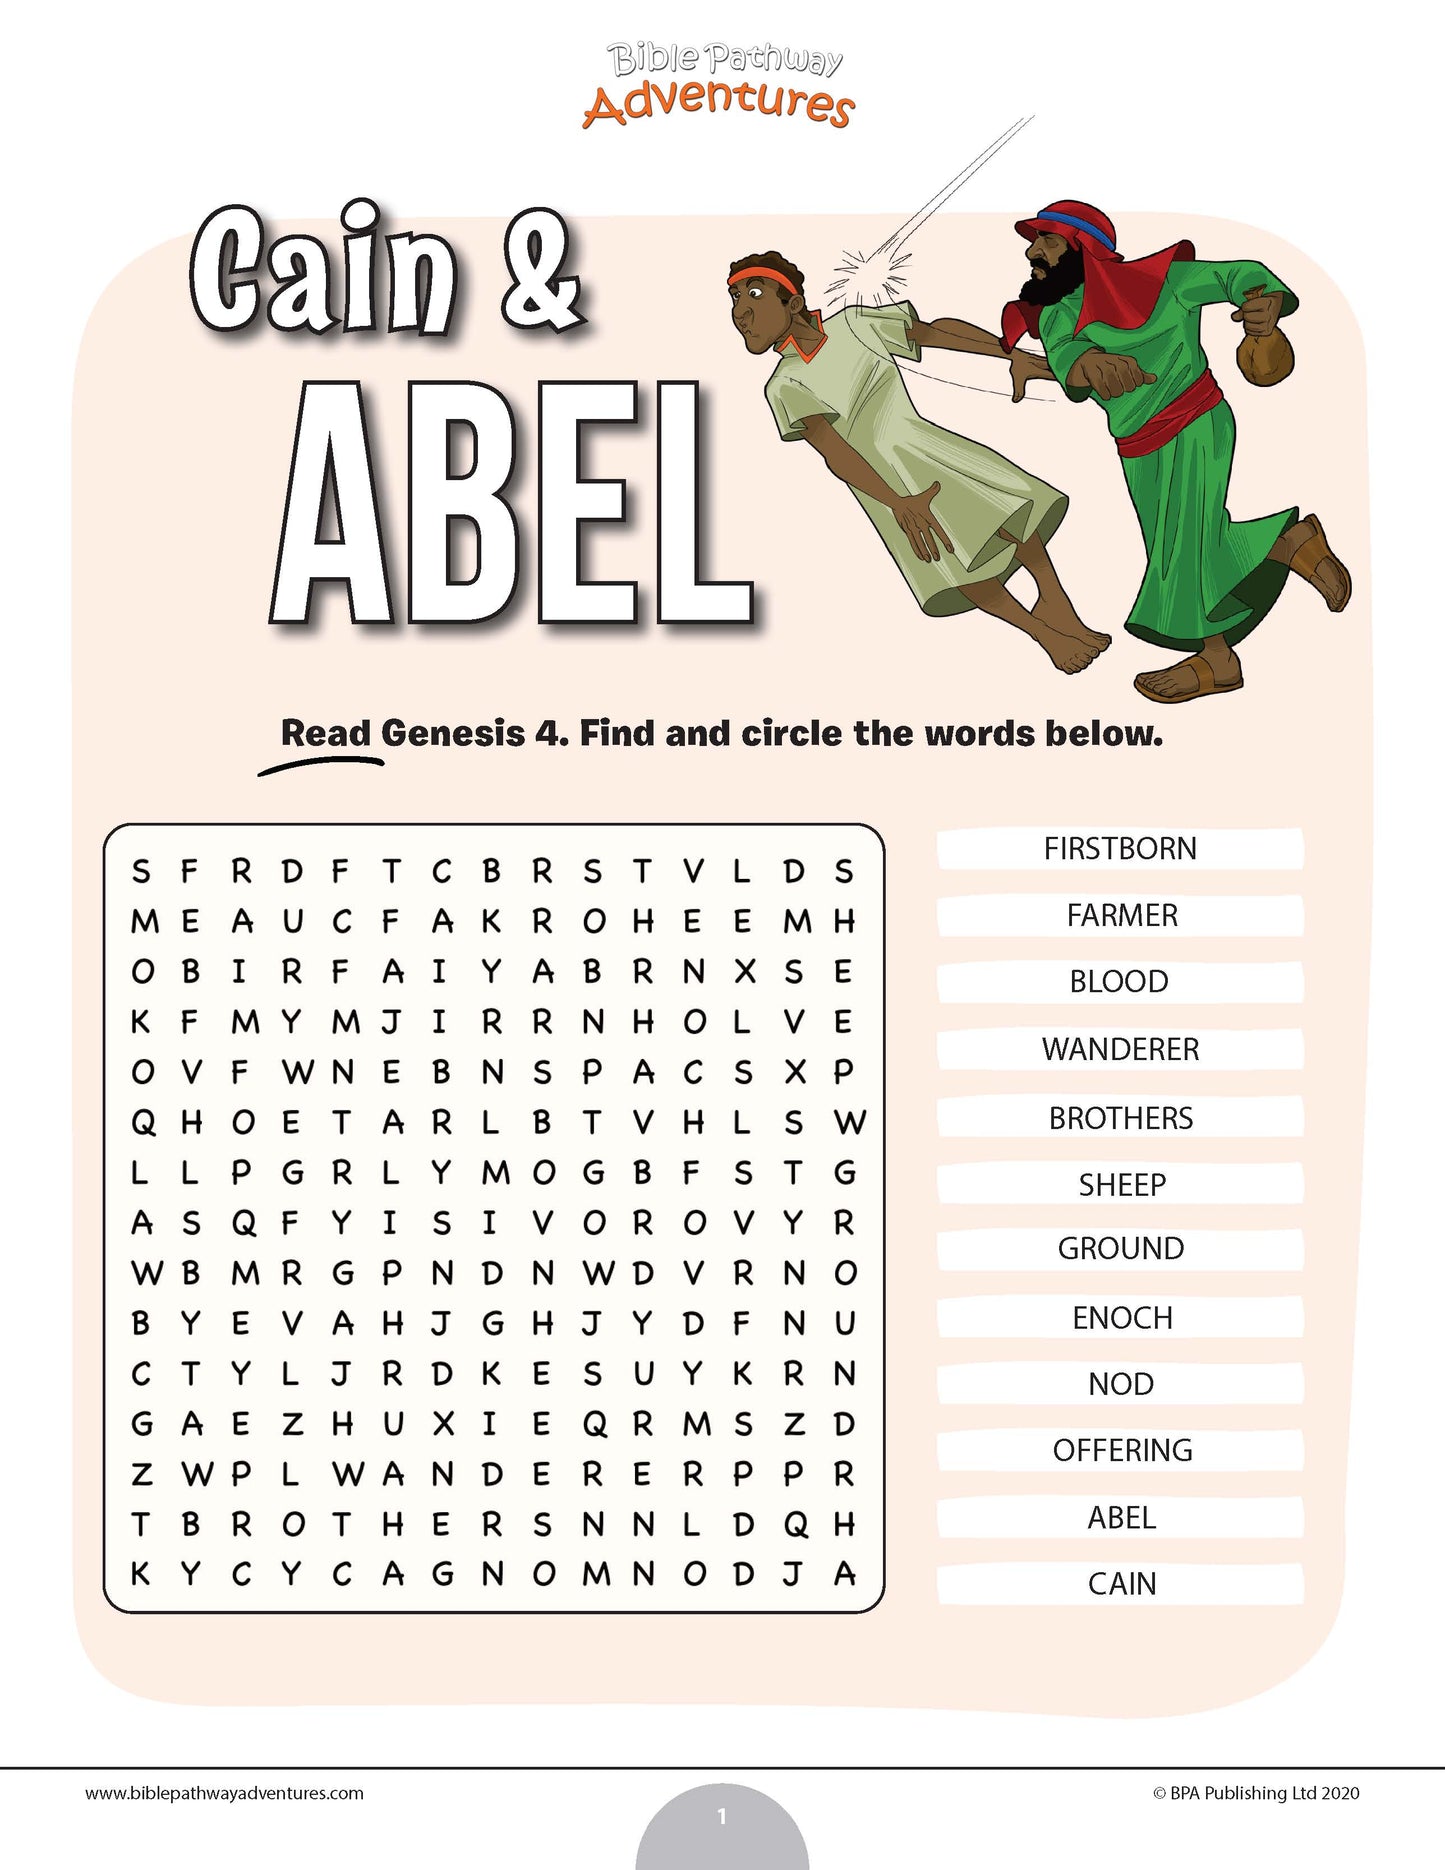 Cain and Abel word search (PDF)